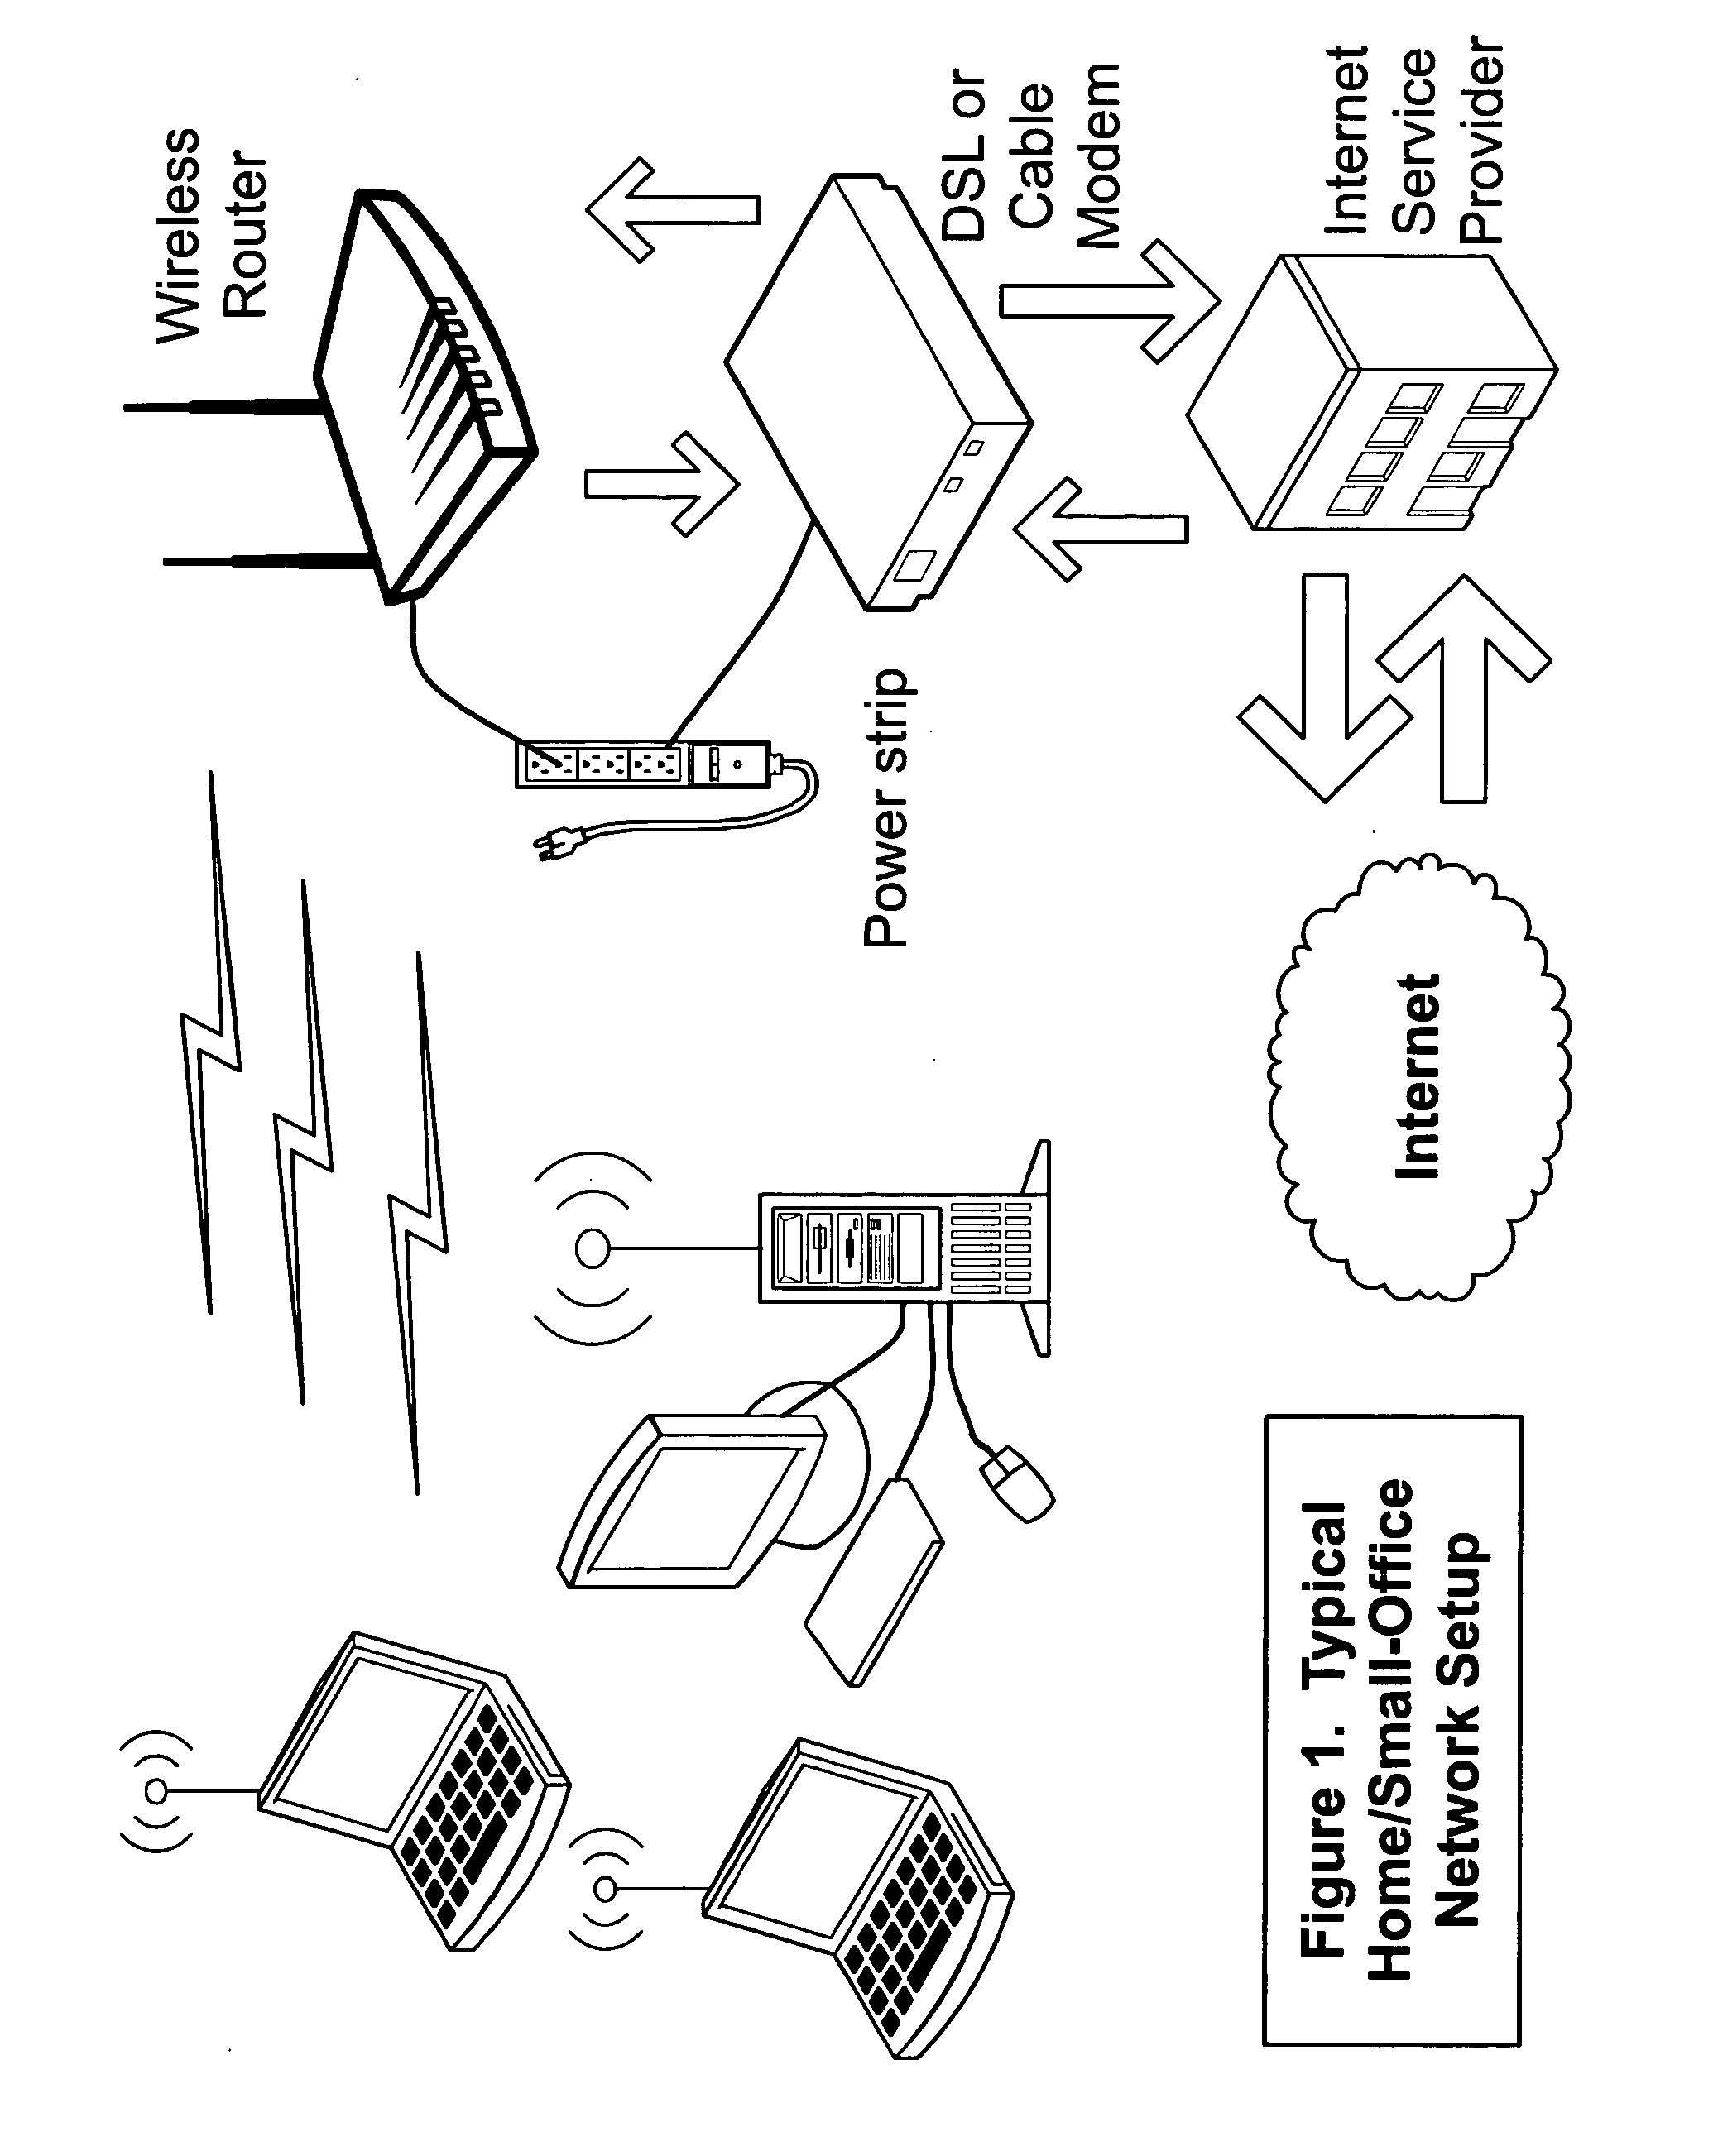 Systems, devices, agents and methods for monitoring and automatic reboot and restoration of computers, local area networks, wireless access points, modems and other hardware